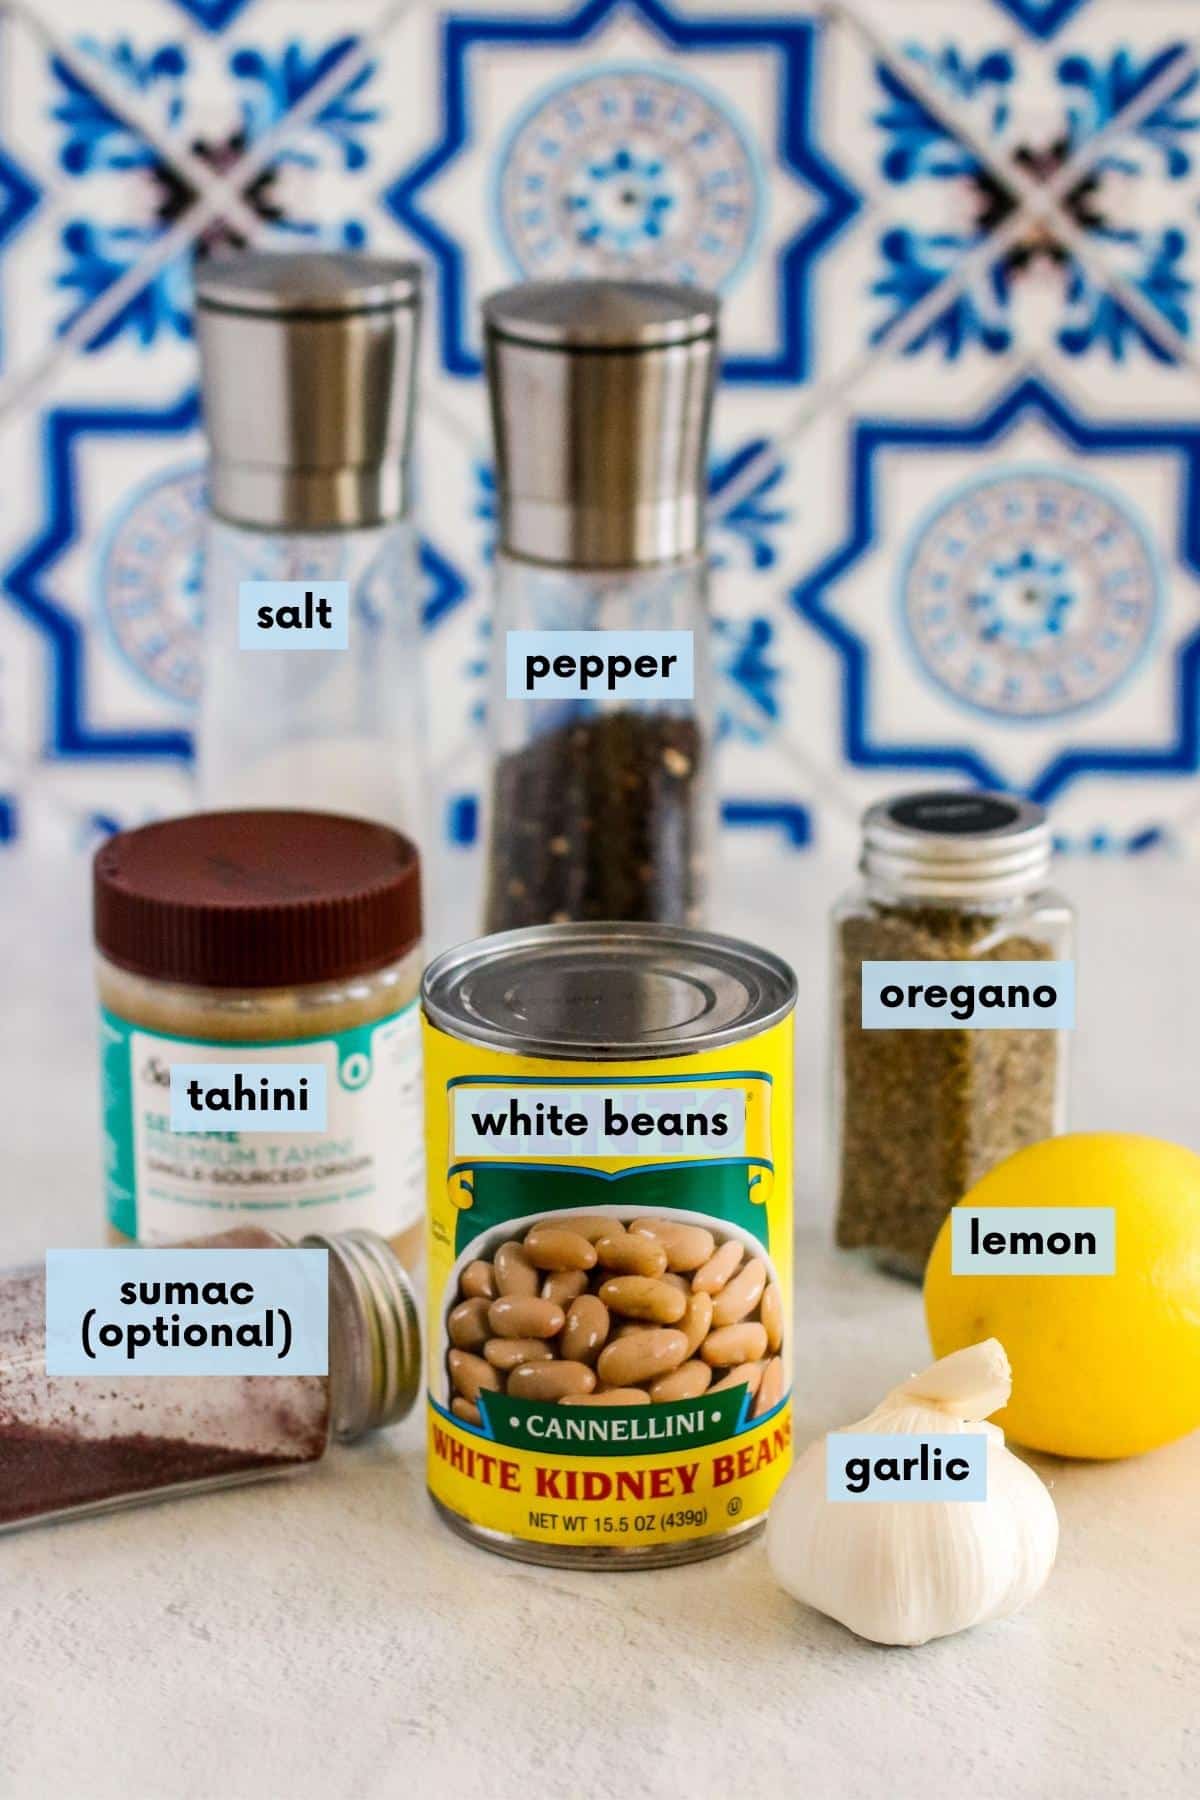 Can of cannellini beans, head of garlic, lemon, dried oregano, jar of tahini, dried sumac, and salt and pepper shakers.